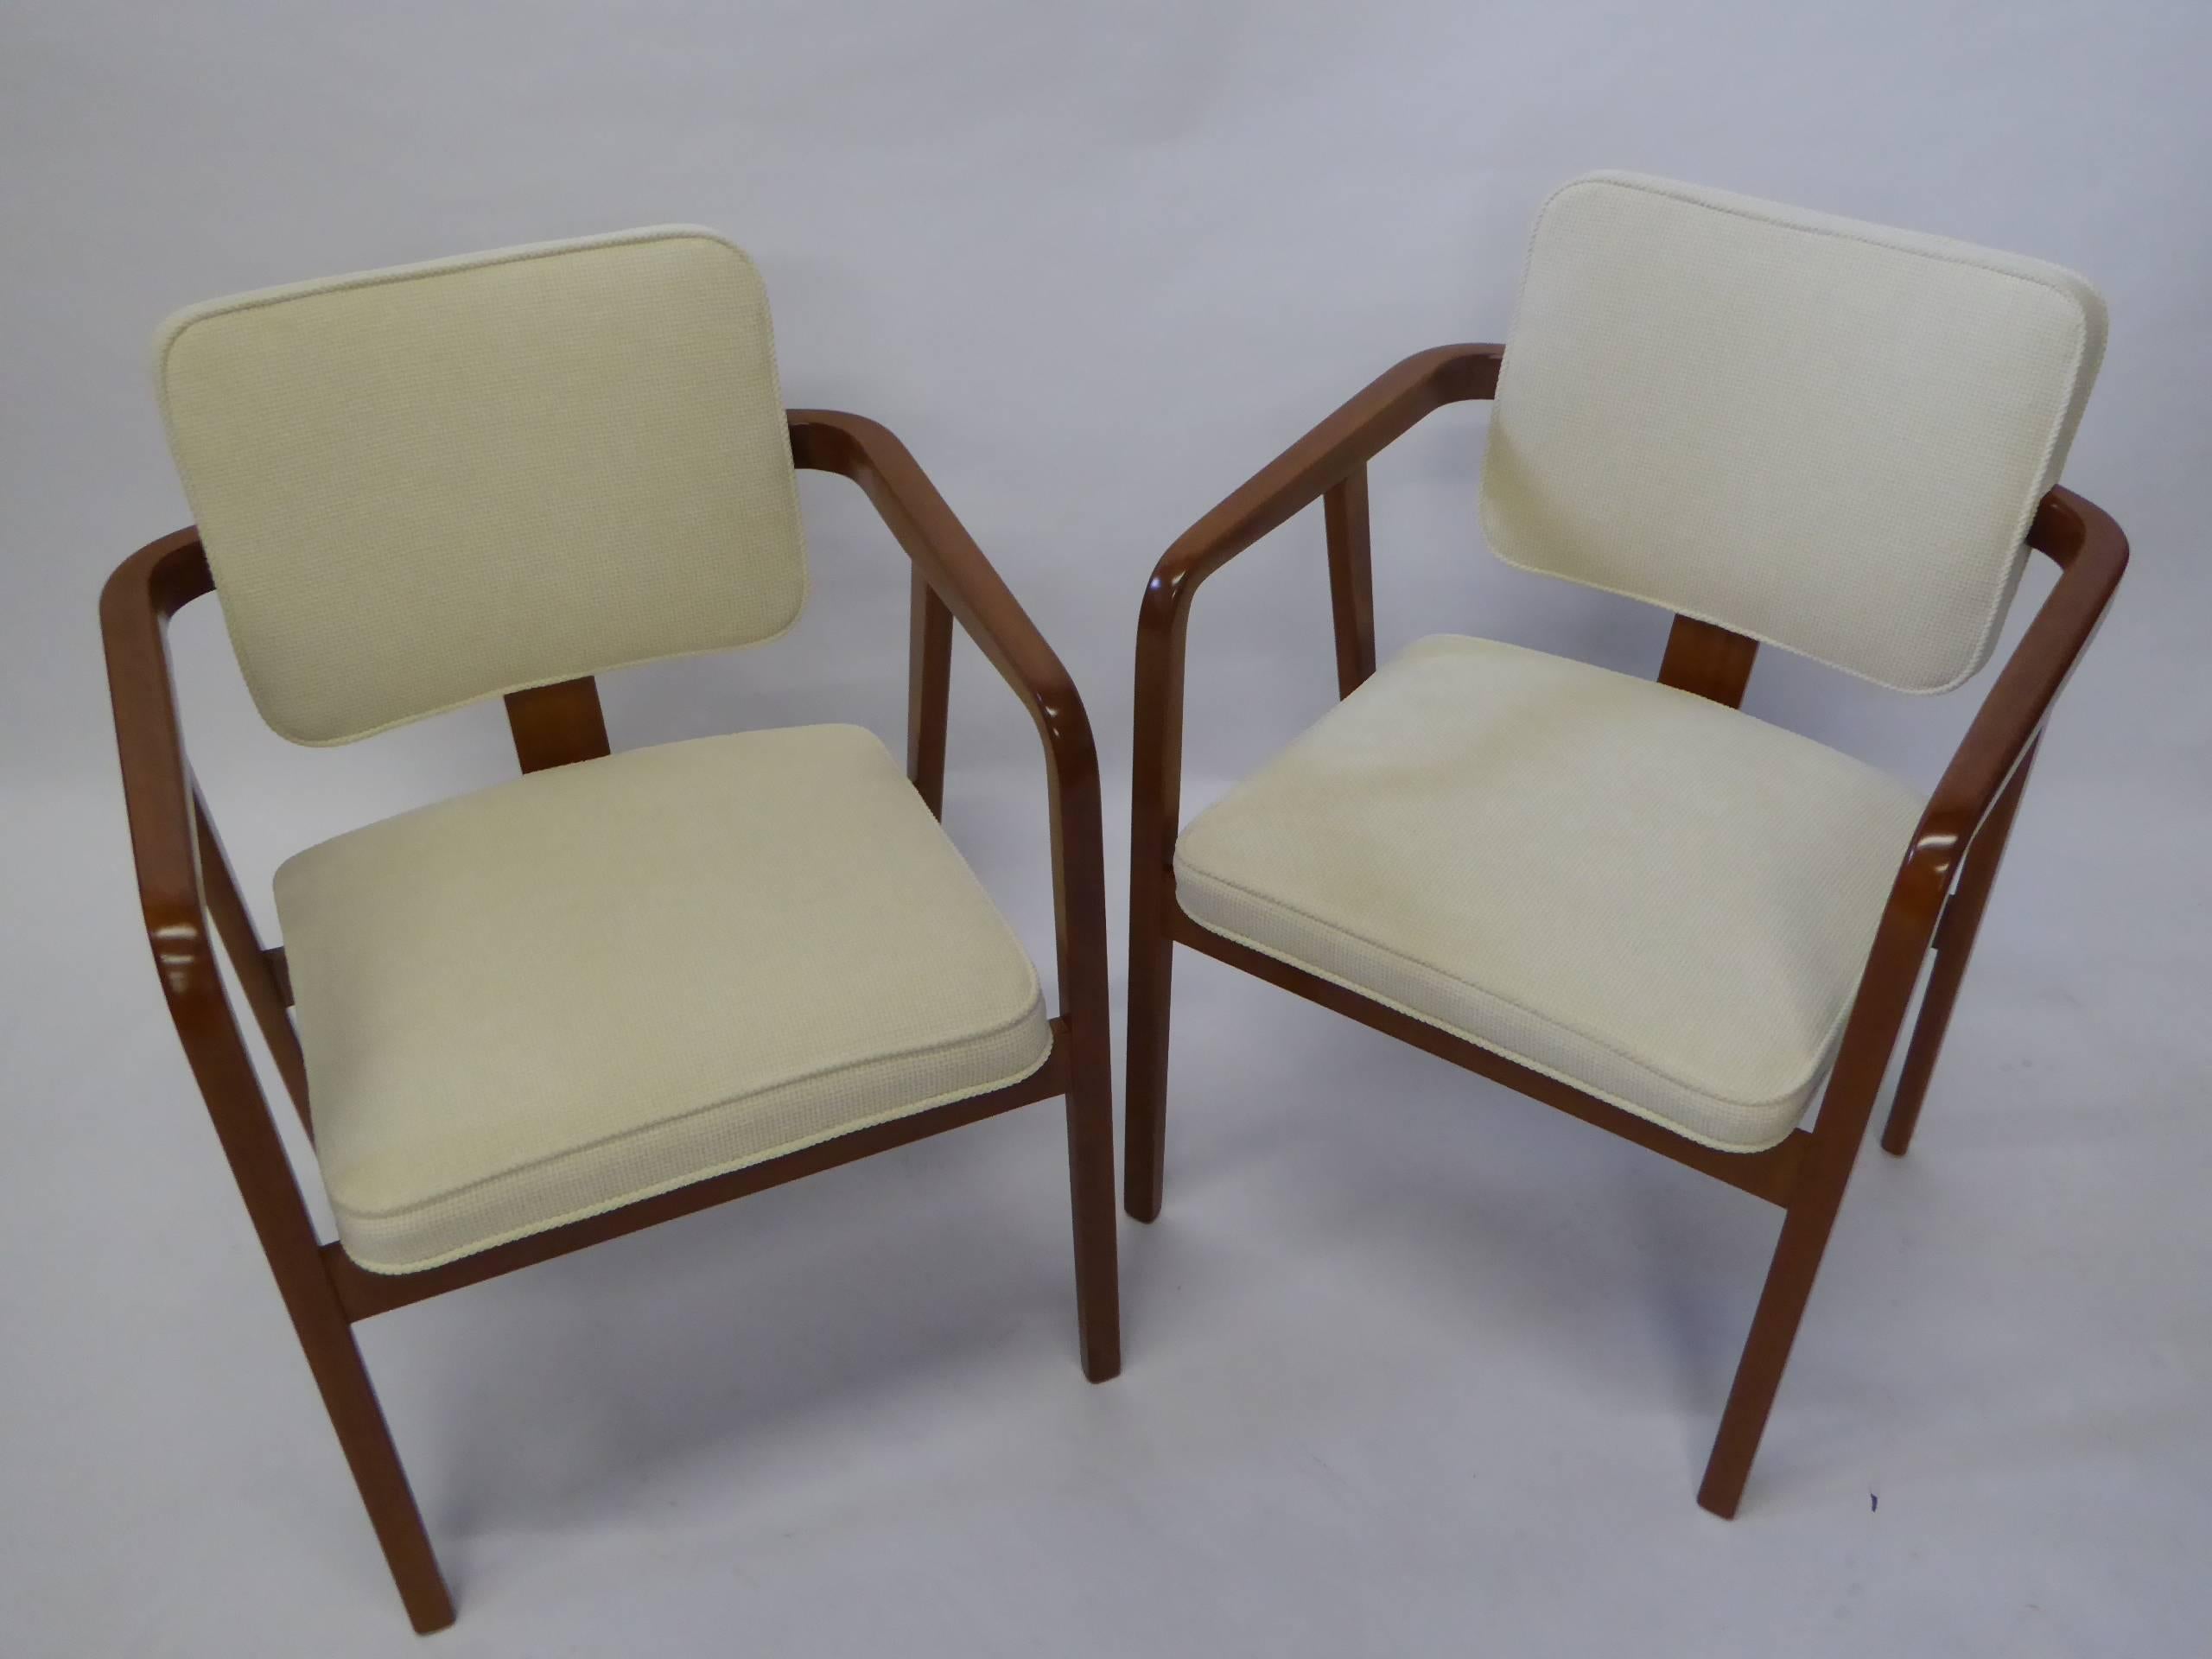 ..SOLD..Pair of George Nelson armchairs designed in 1947 with Ernest Farmer for Herman Miller. Beautifully restored and reupholstered in woven chenille fabric. 
Model 4663.

For trade pricing, please contact dealer.

Measurements:
23